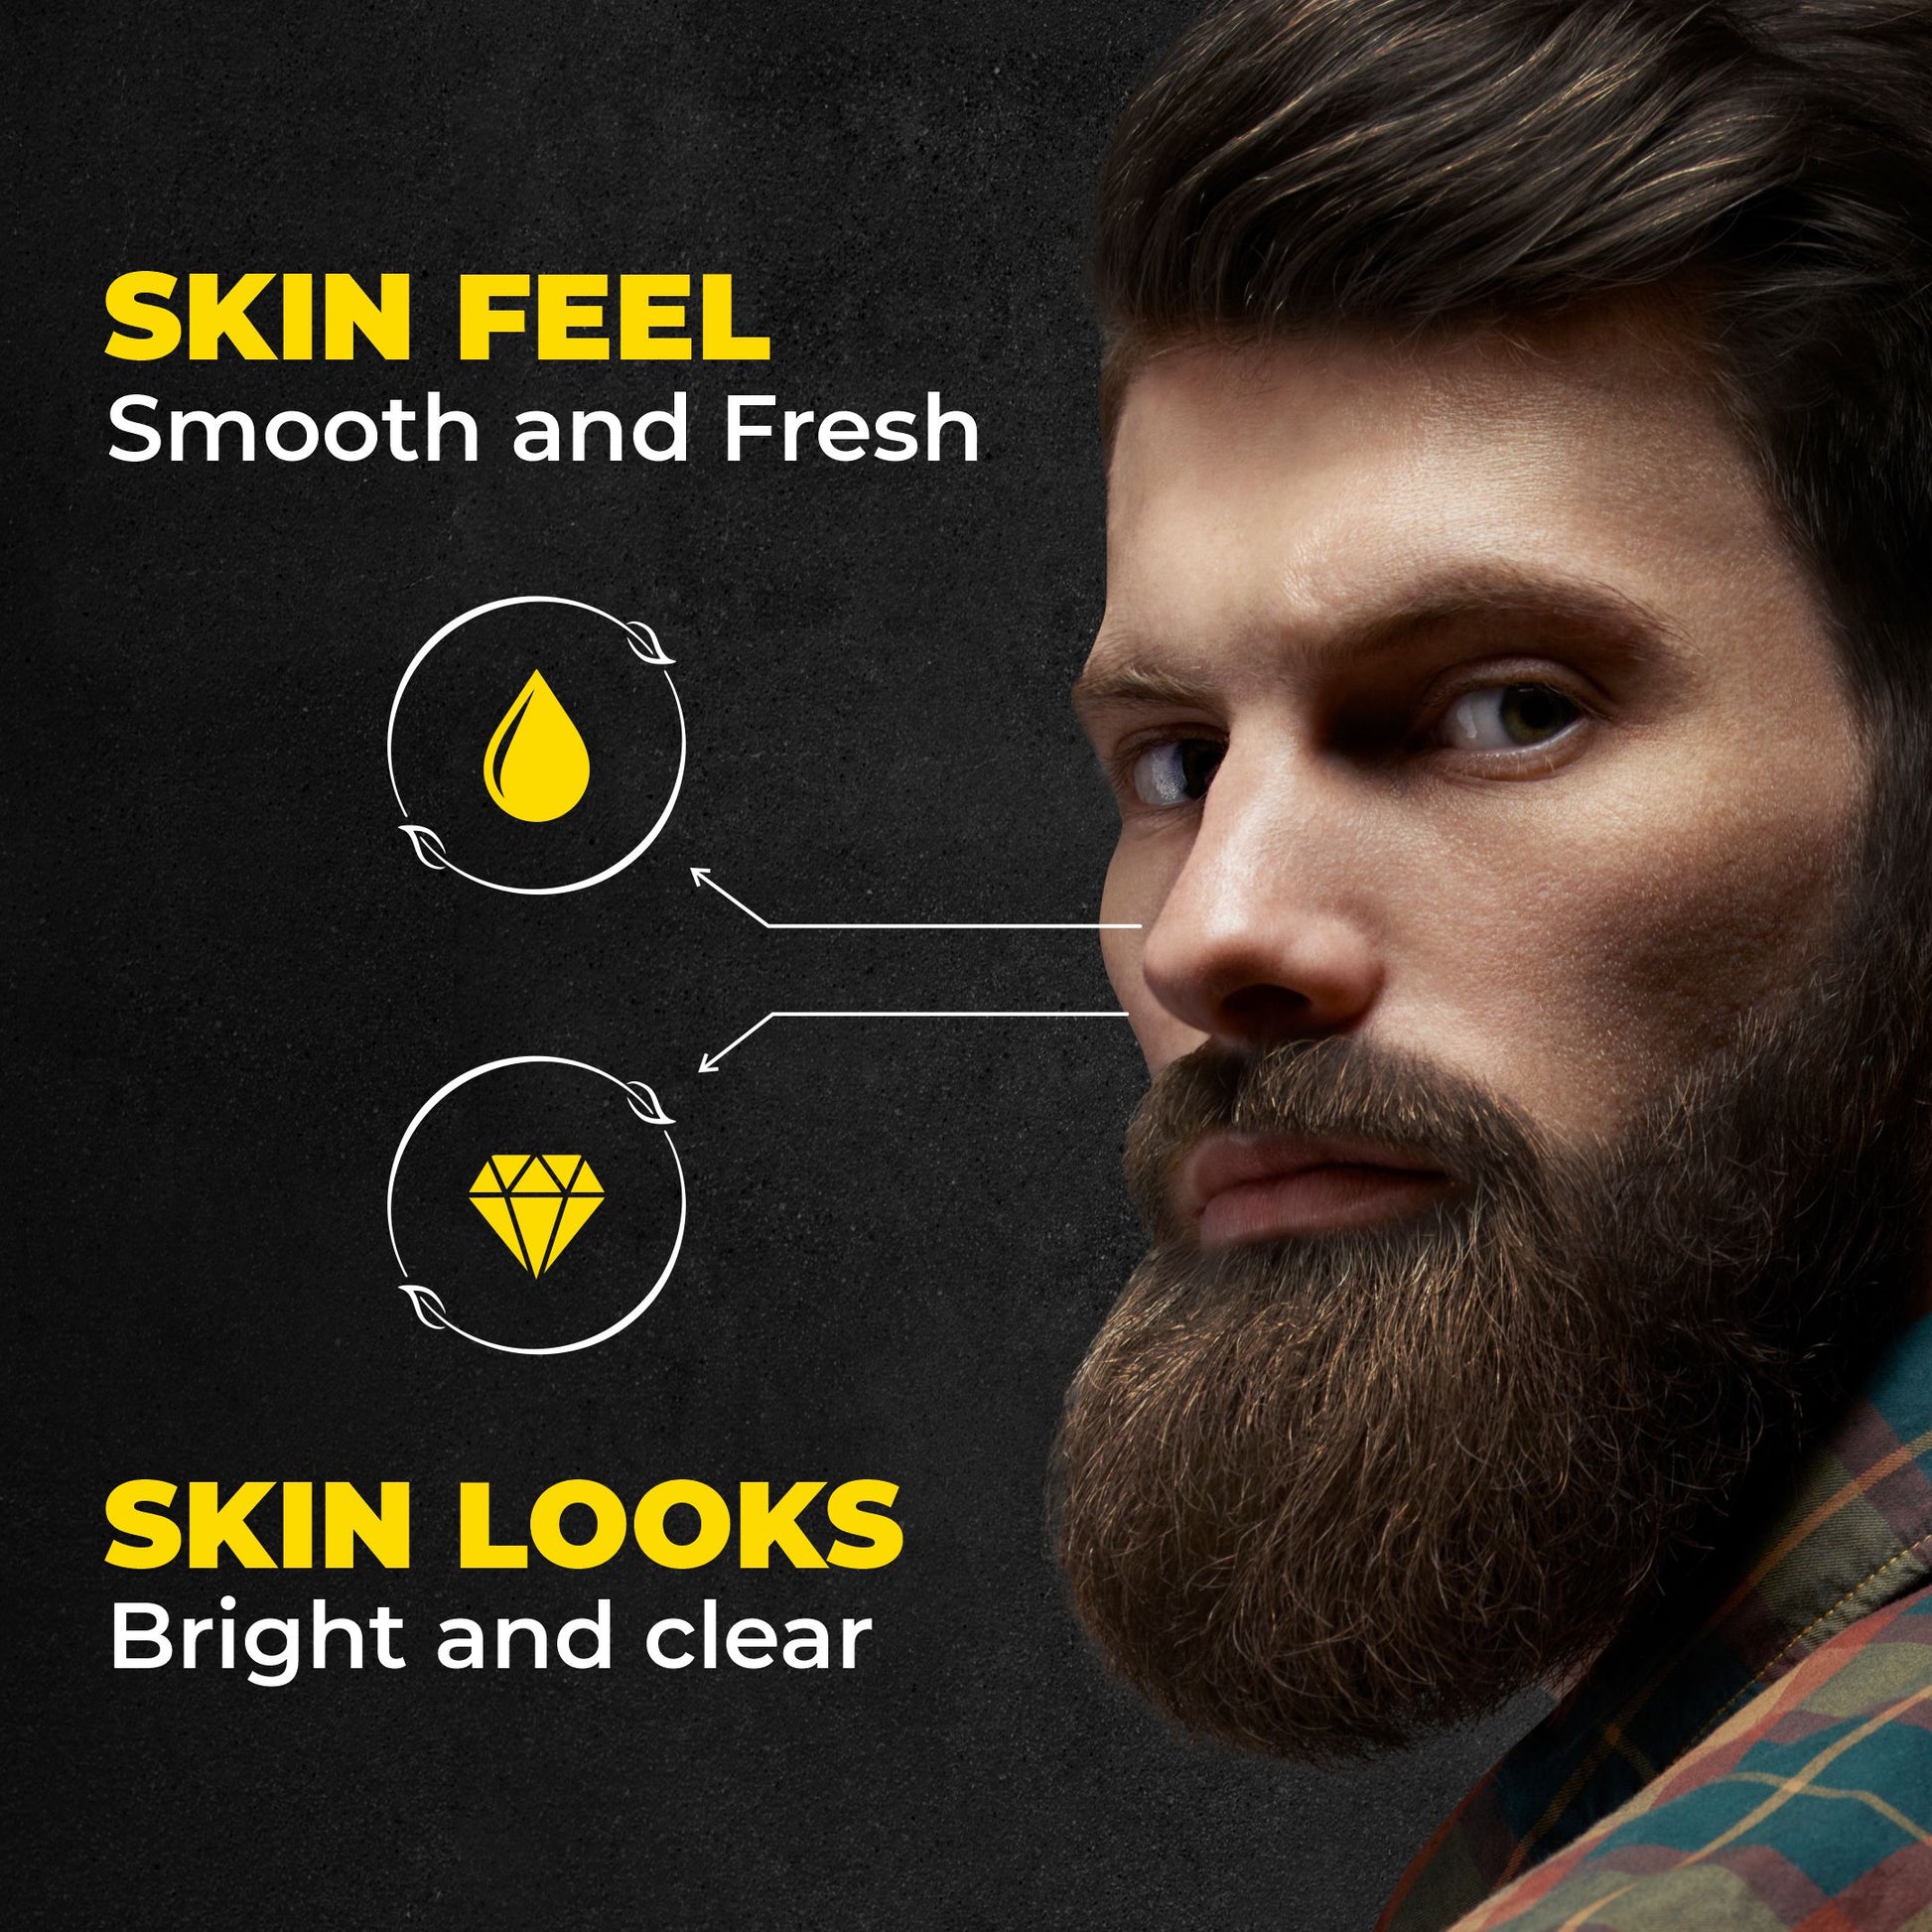 smooth and fresh skin for men, bright skin, clear skin